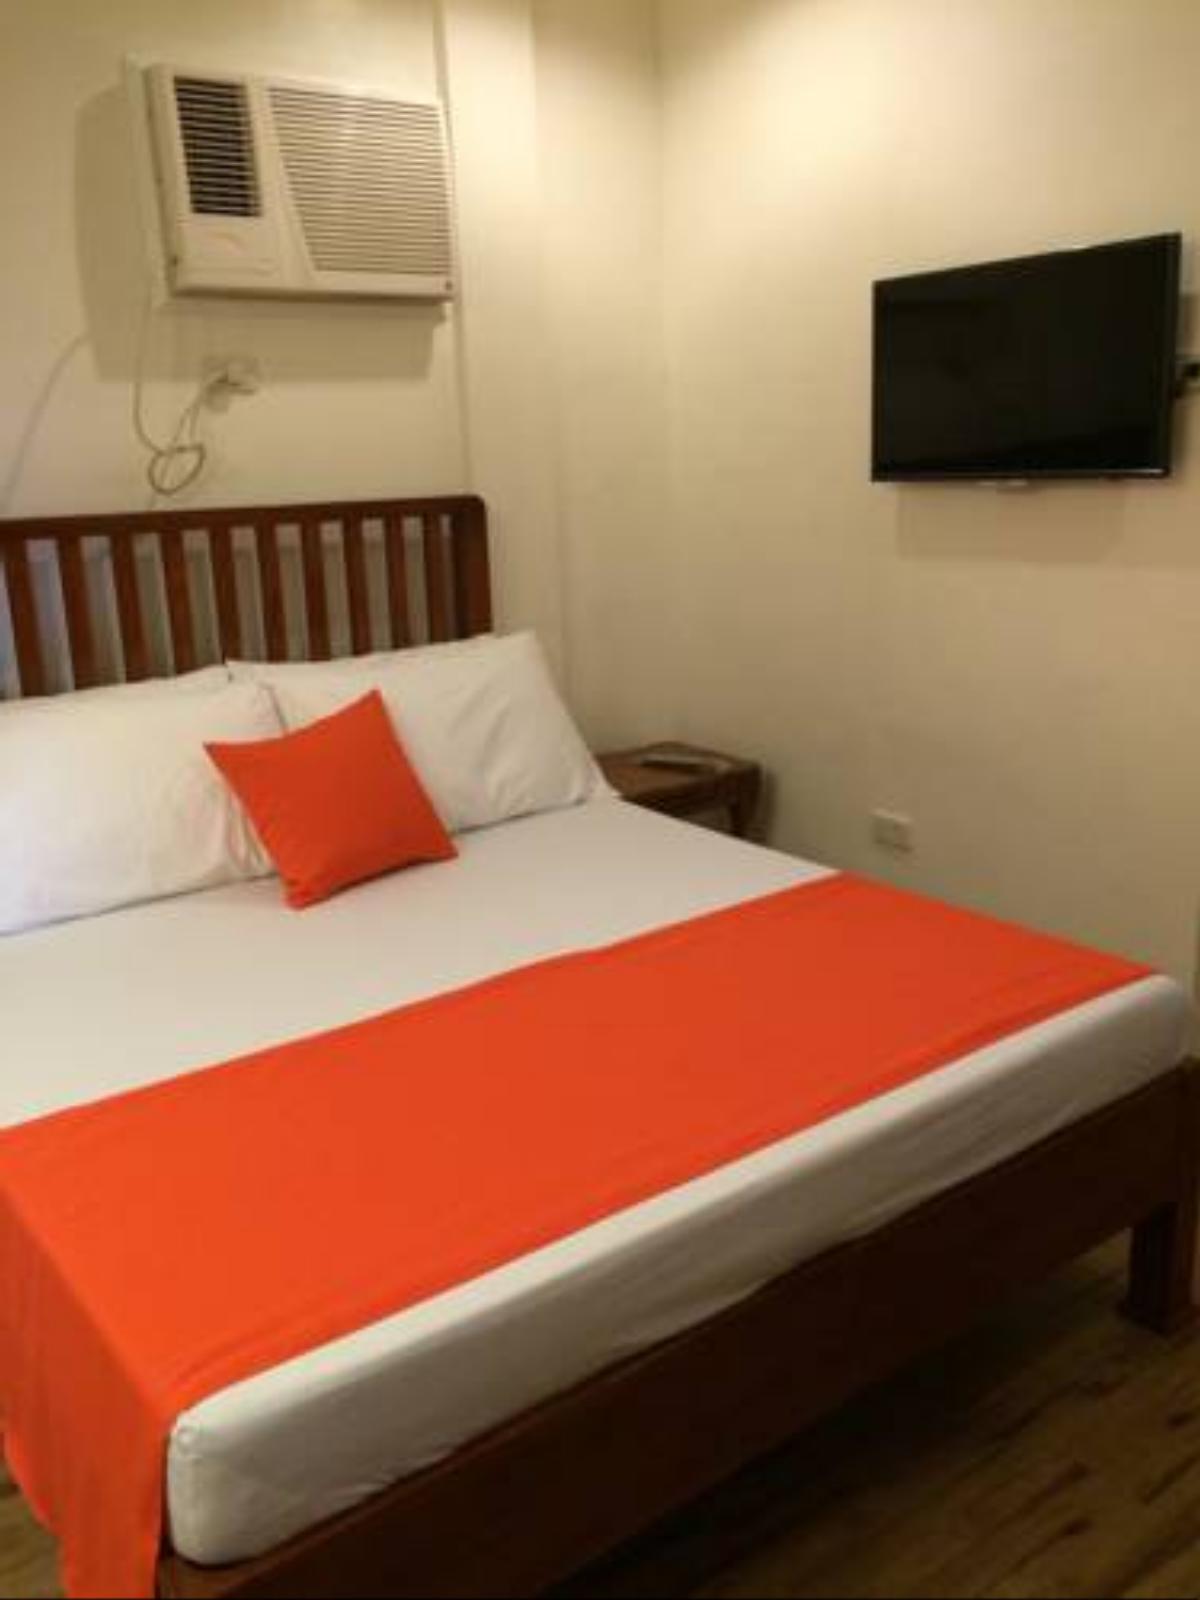 Casa Roces Bed and Breakfast Hotel Legazpi Philippines